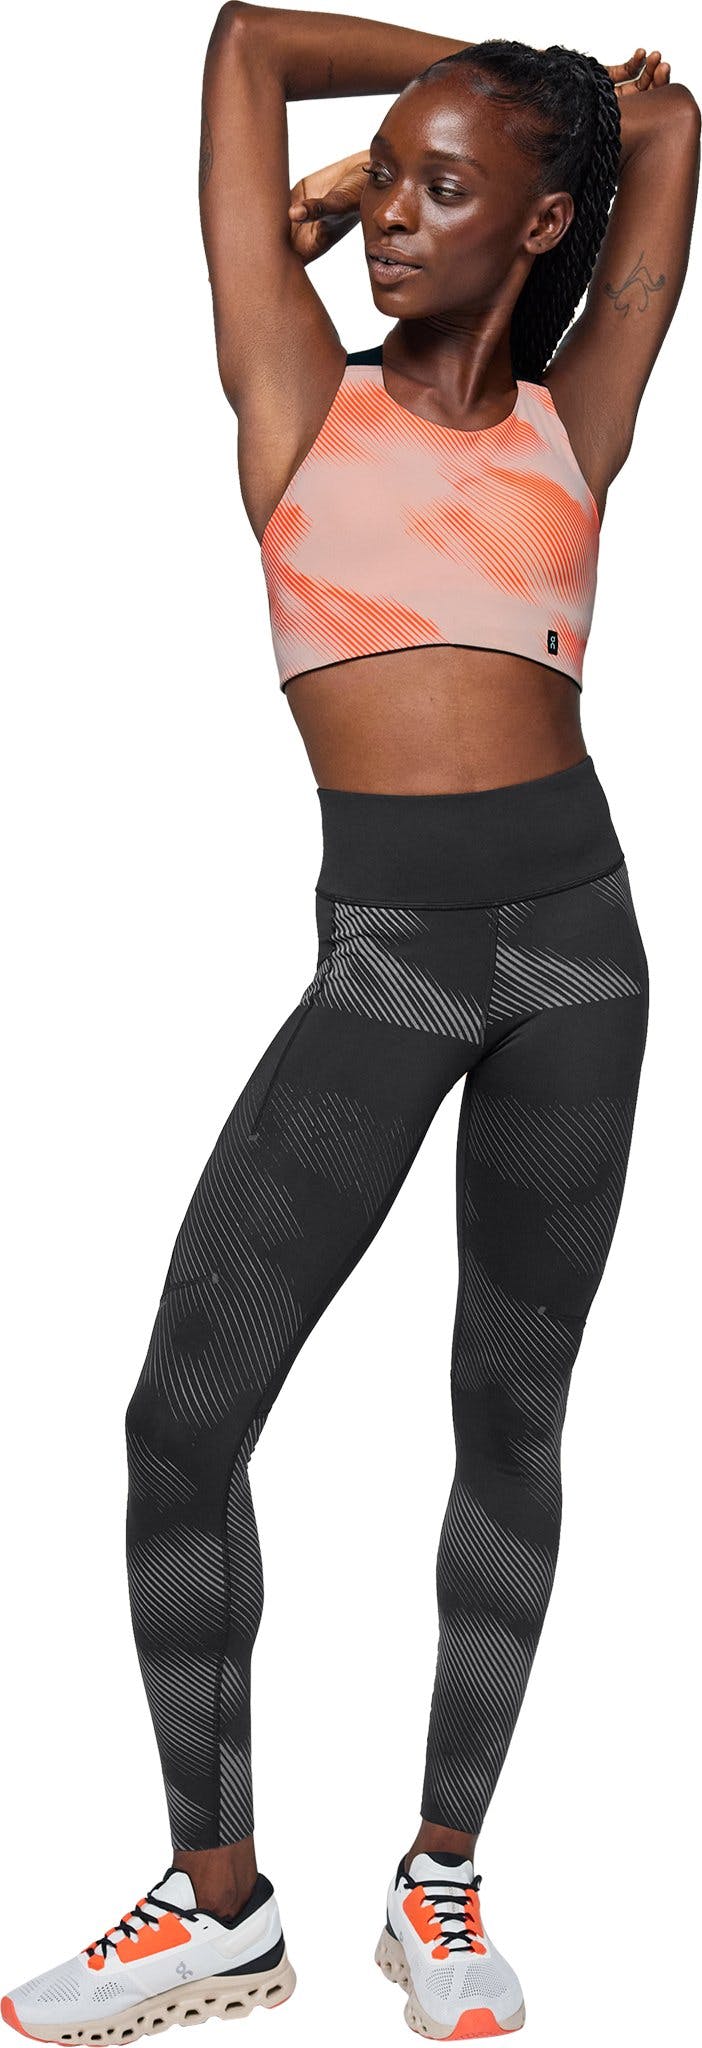 Product image for Lumos Performance Winter Tights - Women's